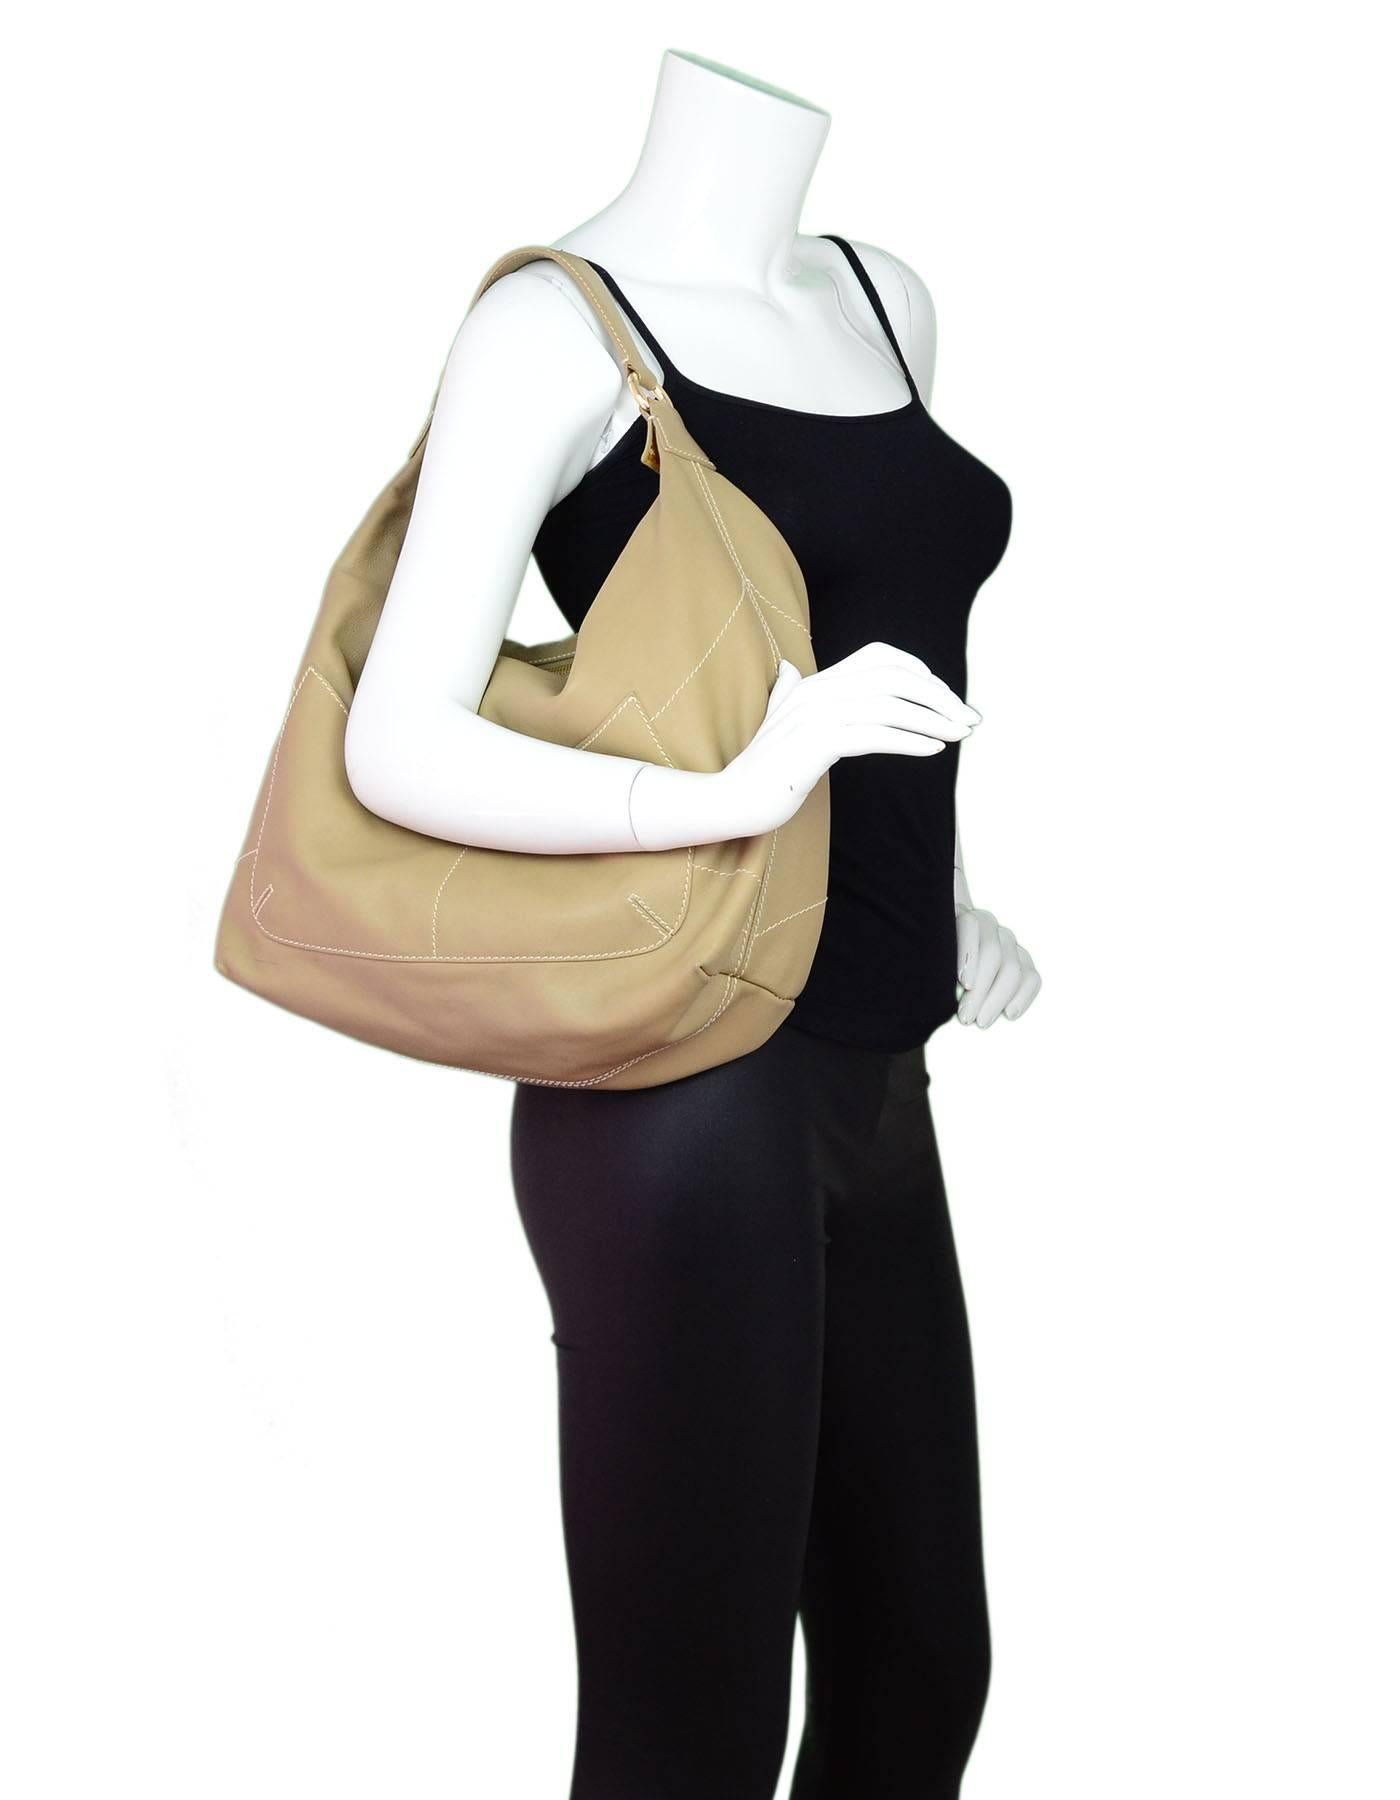 Loro Piana Beige Leather Hobo Bag

Made In: Italy
Color: Beige
Hardware: Goldtone
Materials: Leather
Lining: Beige textile
Closure/Opening: Zip top
Exterior Pockets: Two patch pockets
Interior Pockets: One zip wall pocket
Overall Condition: